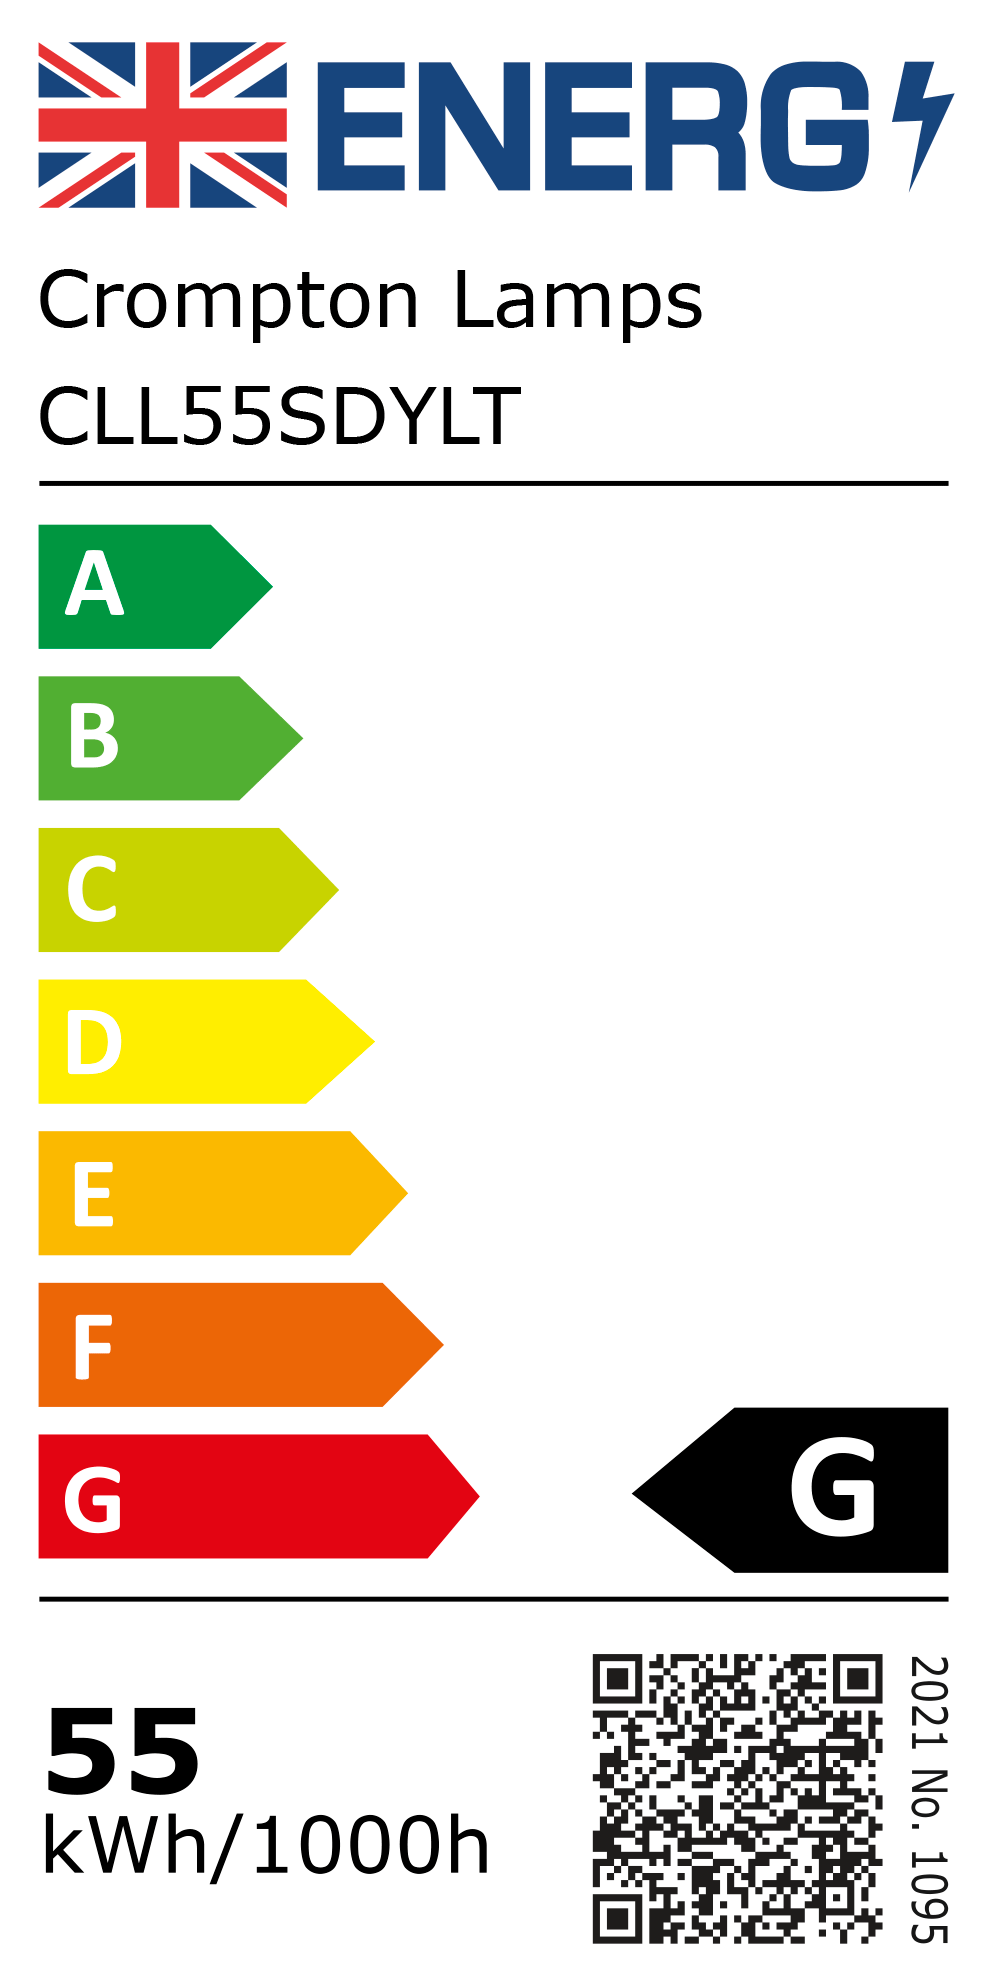 New 2021 Energy Rating Label: Stock Code CLL55SDYLT